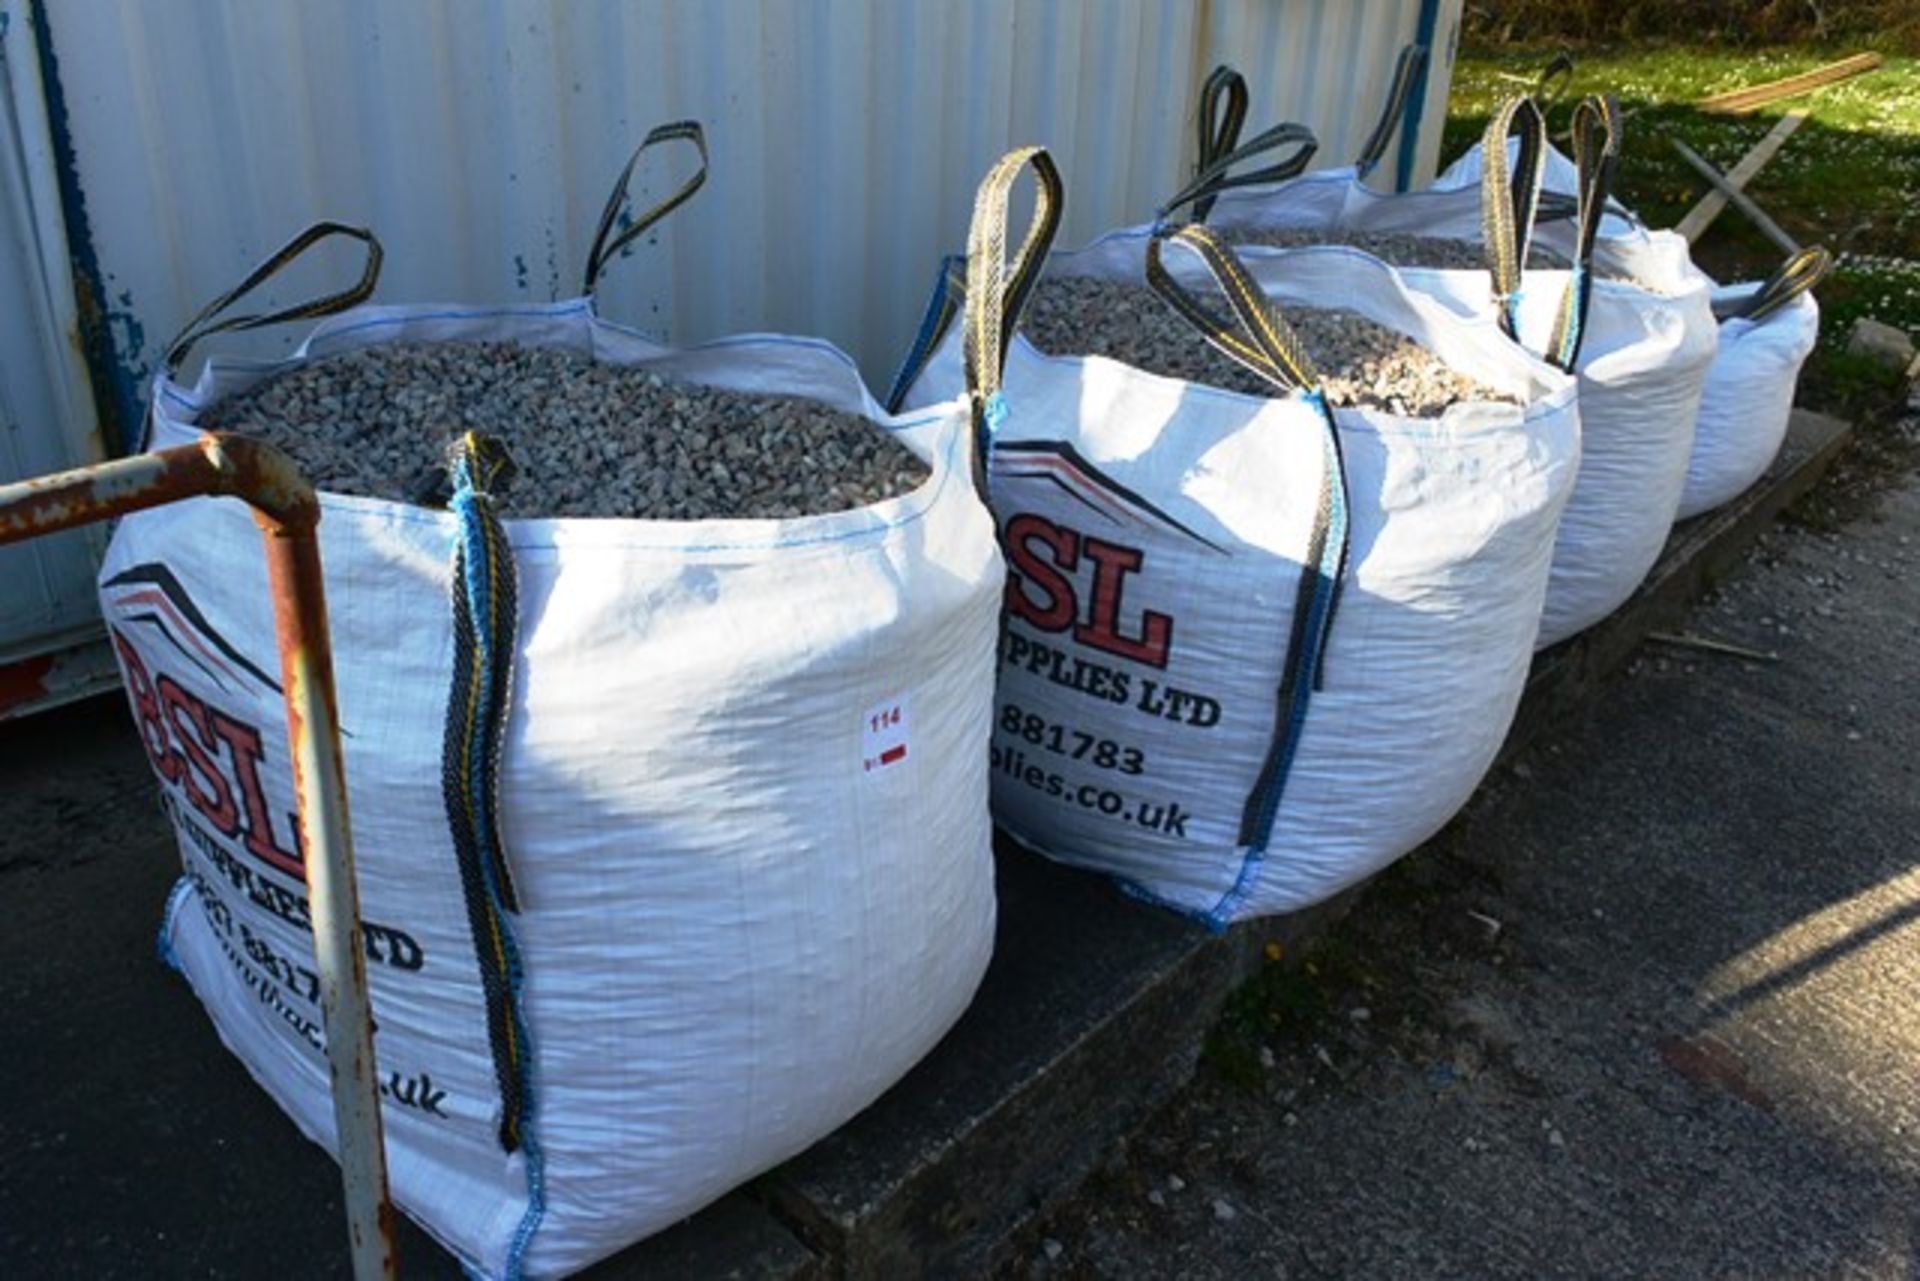 Contents of four dumpy bags incl. gravel/aggregate (Please note: A work Method Statement and Risk